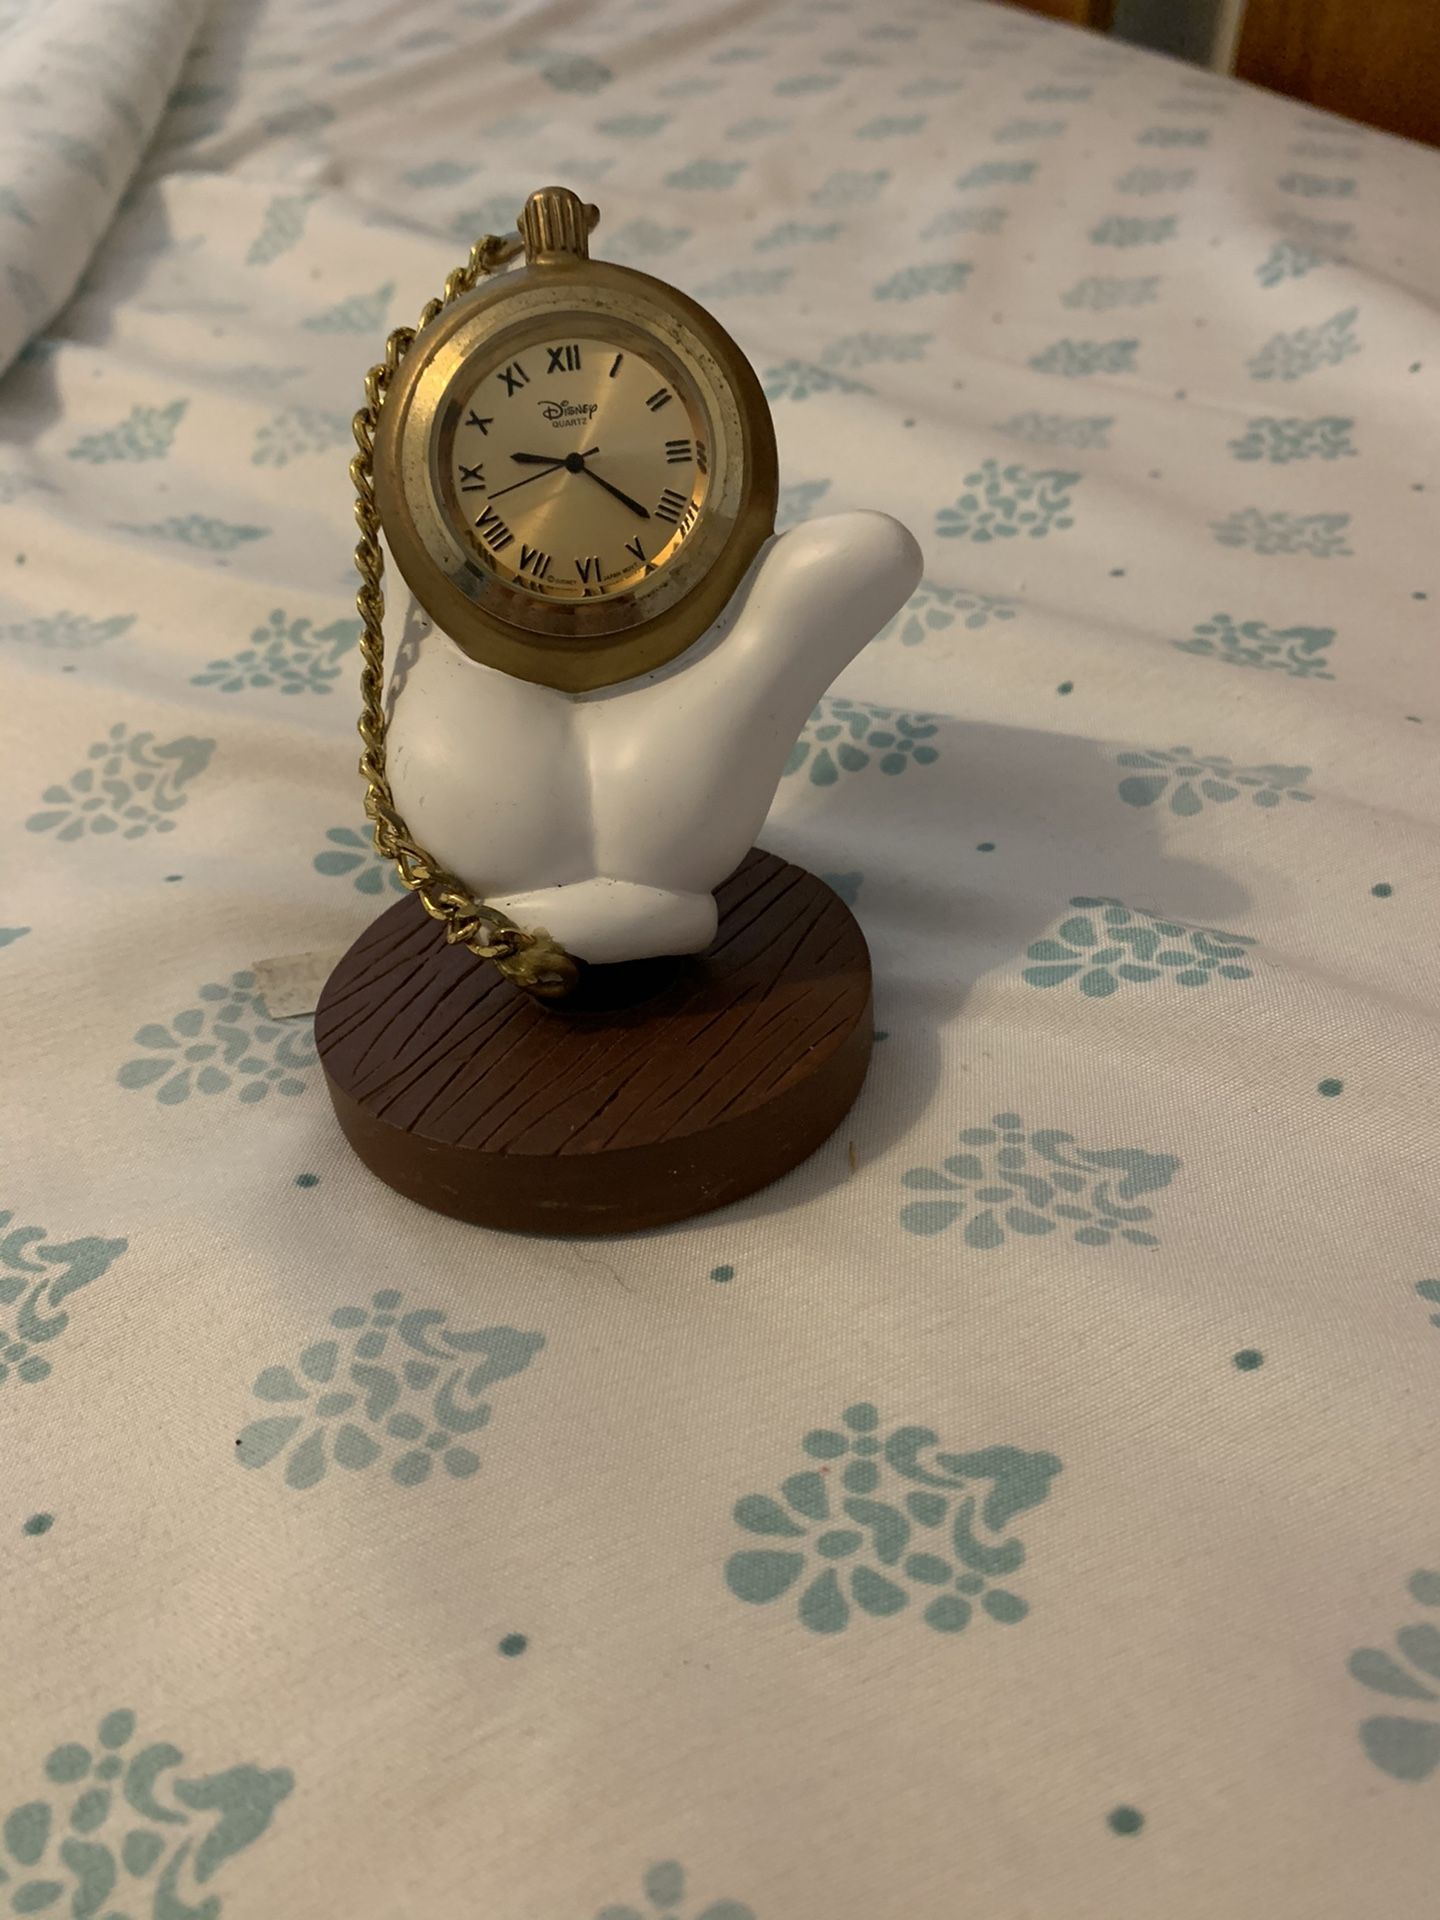 A Collectible Mickey Mouse Hans Clock Statue for a steal !!